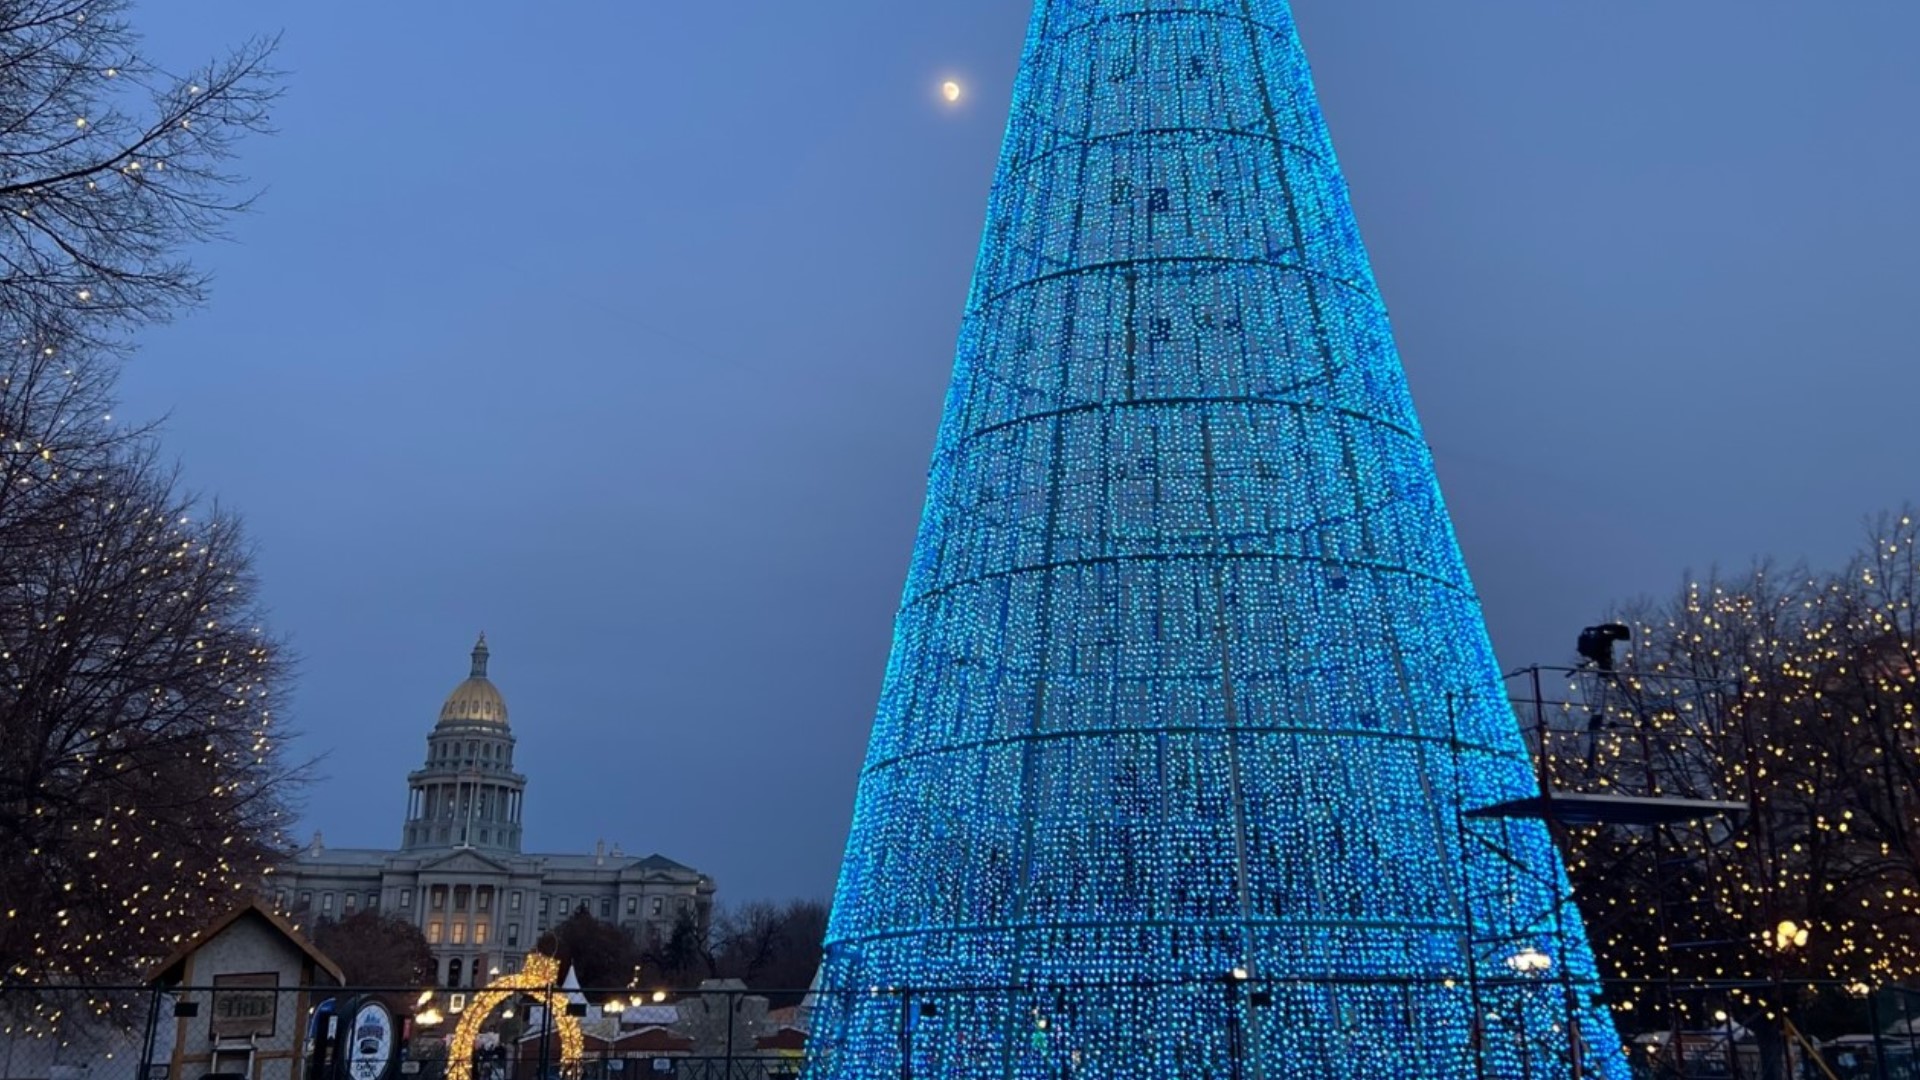 The Mile High Tree features light shows choreographed to multi-cultural holiday music on the tallest pixel LED technology tree in the country.